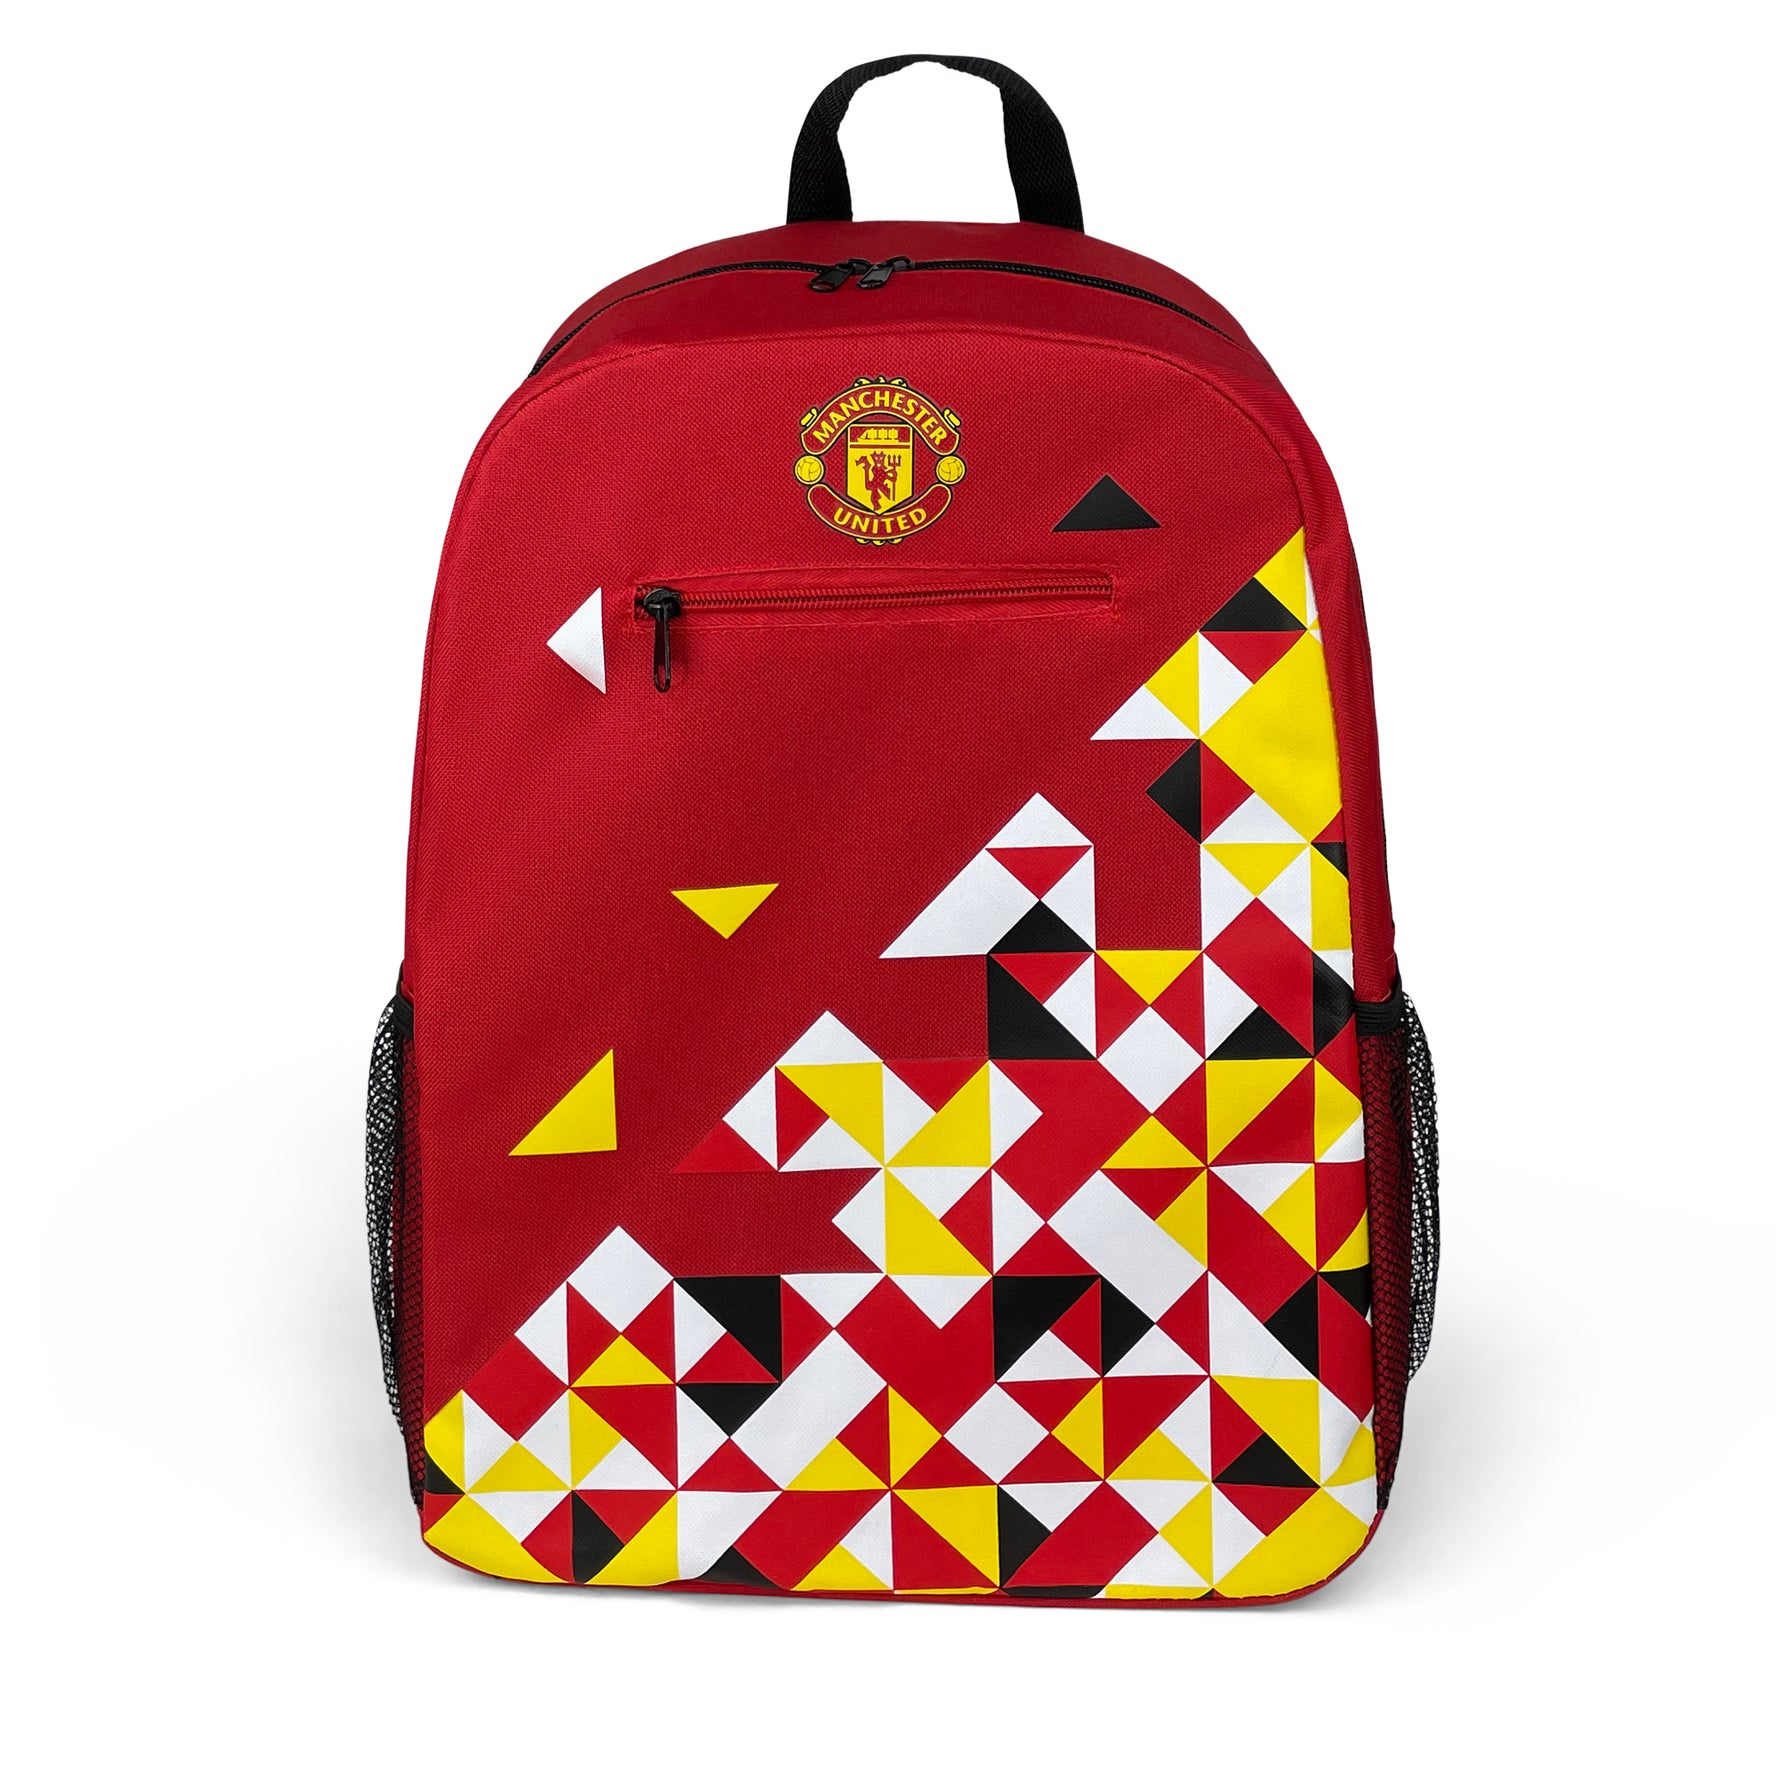 Particle Football Backpack-Backpack-Football Backpacks-Manchester United FC-SchoolBagsAndStuff